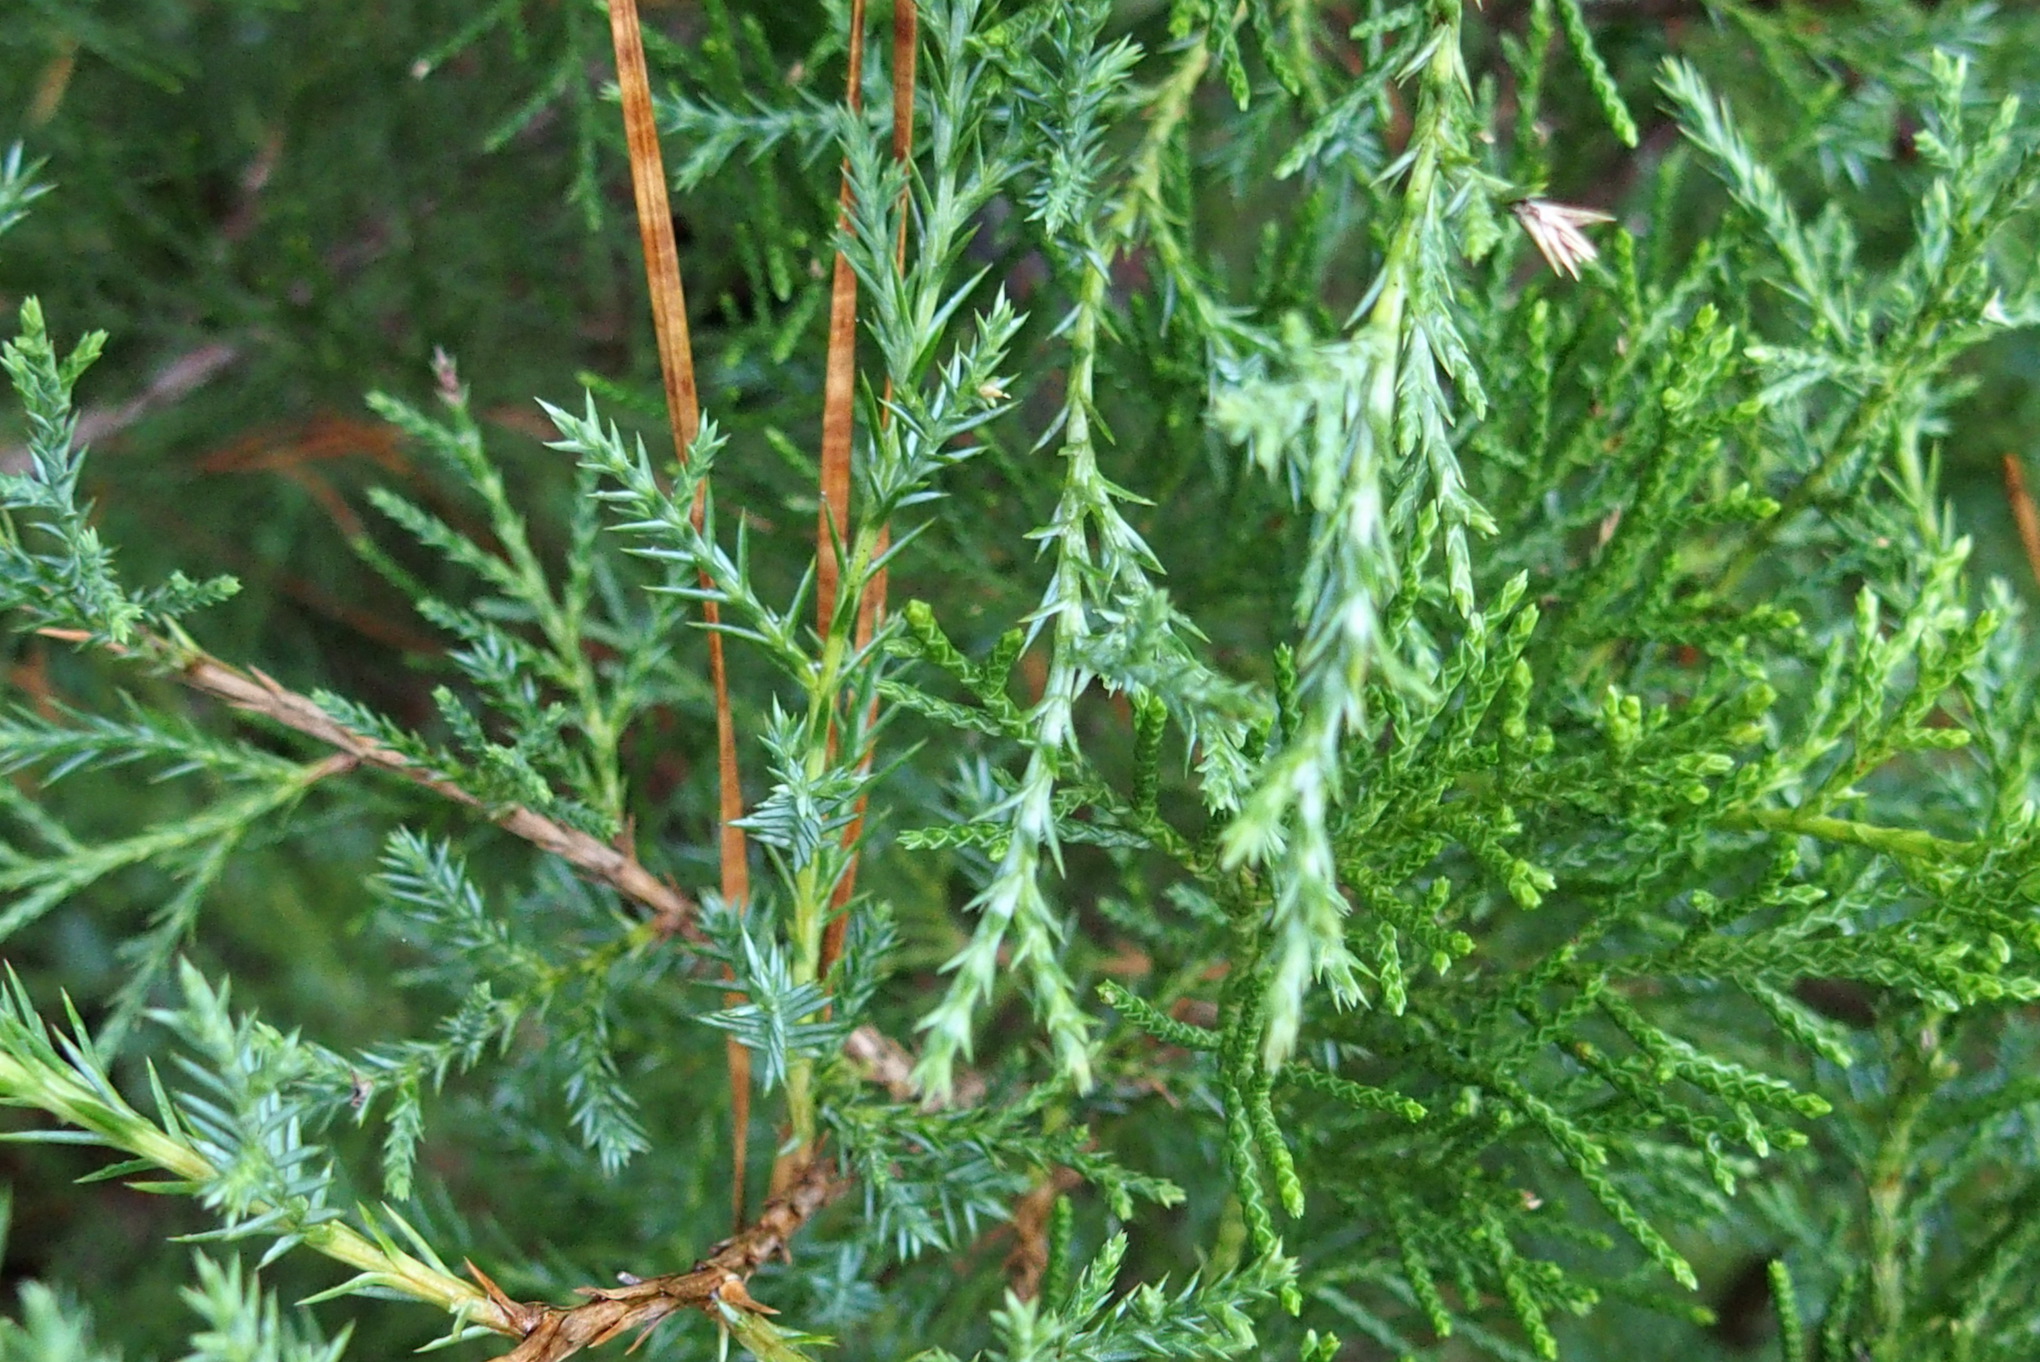 The Scientific Name is Juniperus virginiana. You will likely hear them called Eastern Red Cedar. This picture shows the Has both needles and scales - a key characteristic of Juniperus virginiana